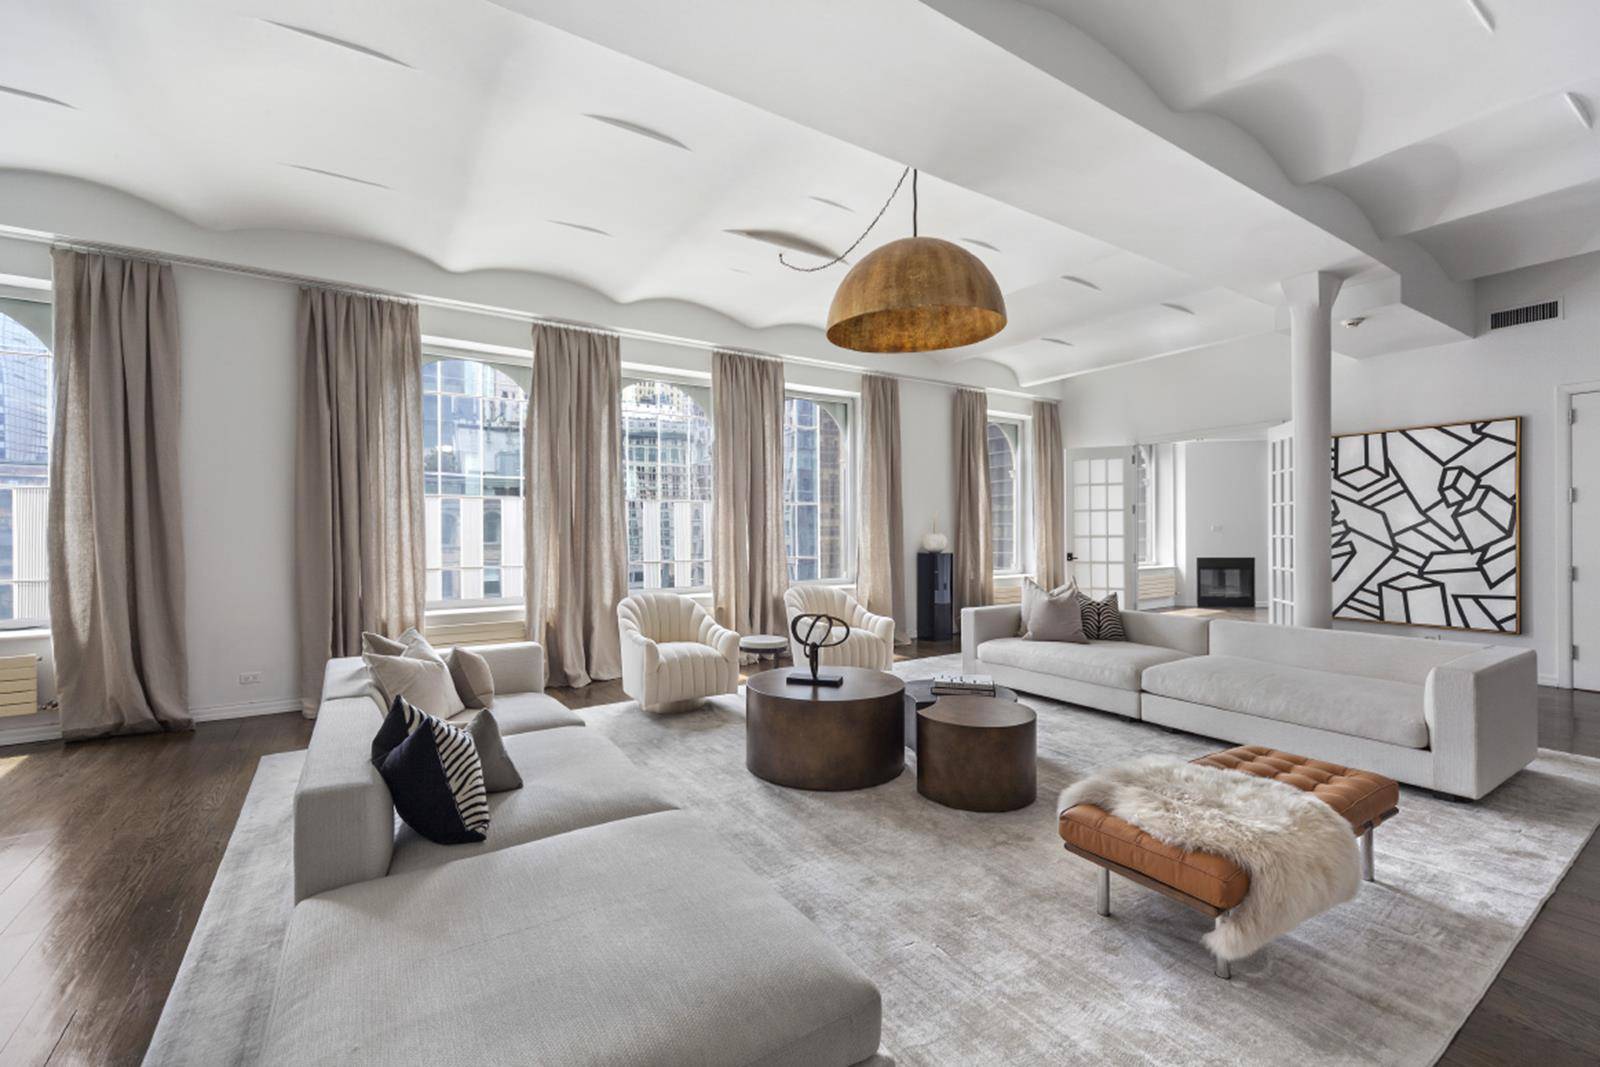 This Financial District's celebrated duplex condo Penthouse is now available for the first time in many years.